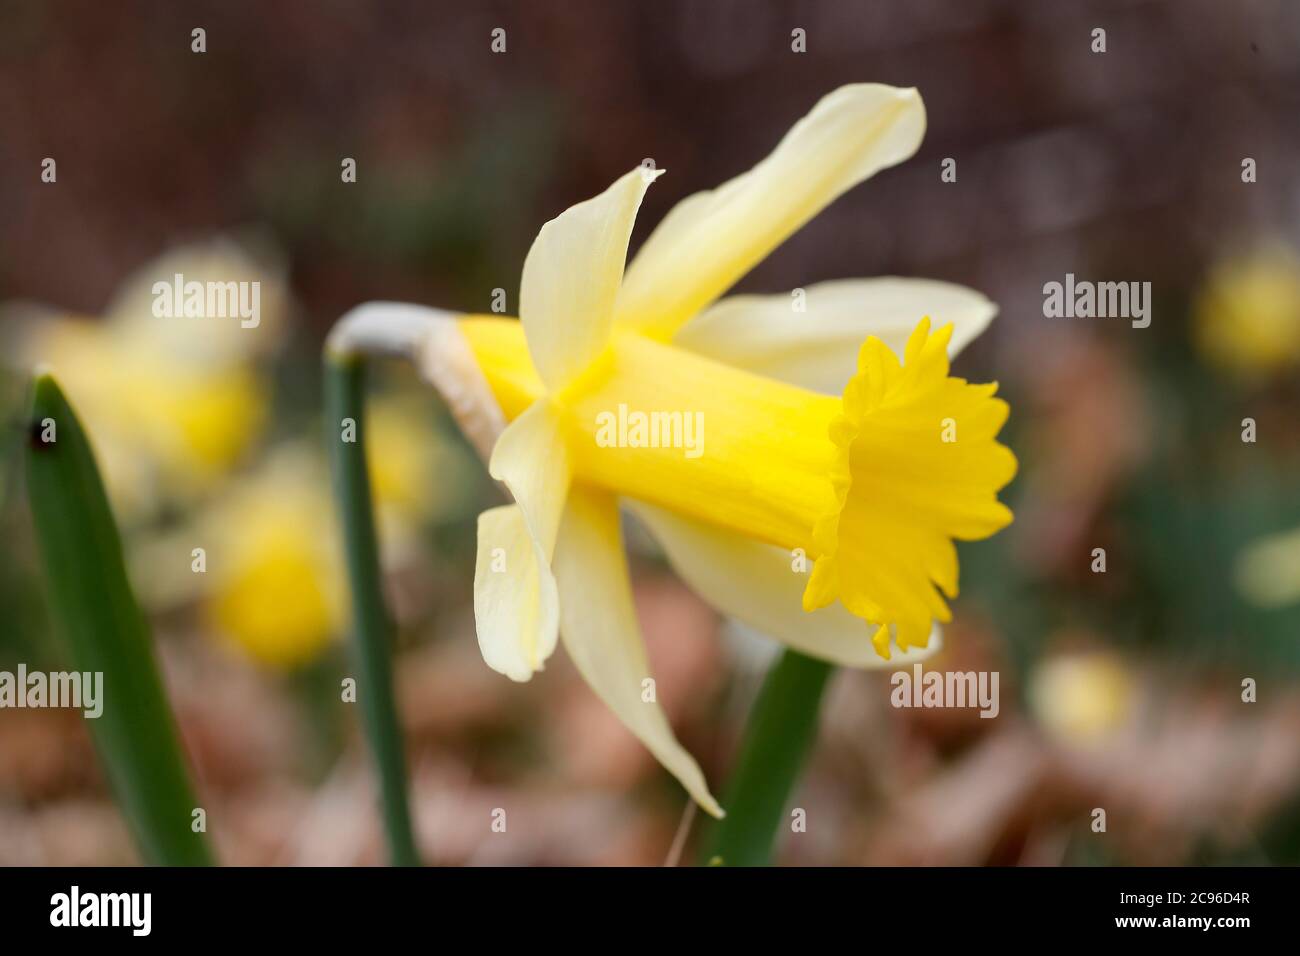 Yellow daffodil flowers in spring. Saint Gervais. France. Stock Photo